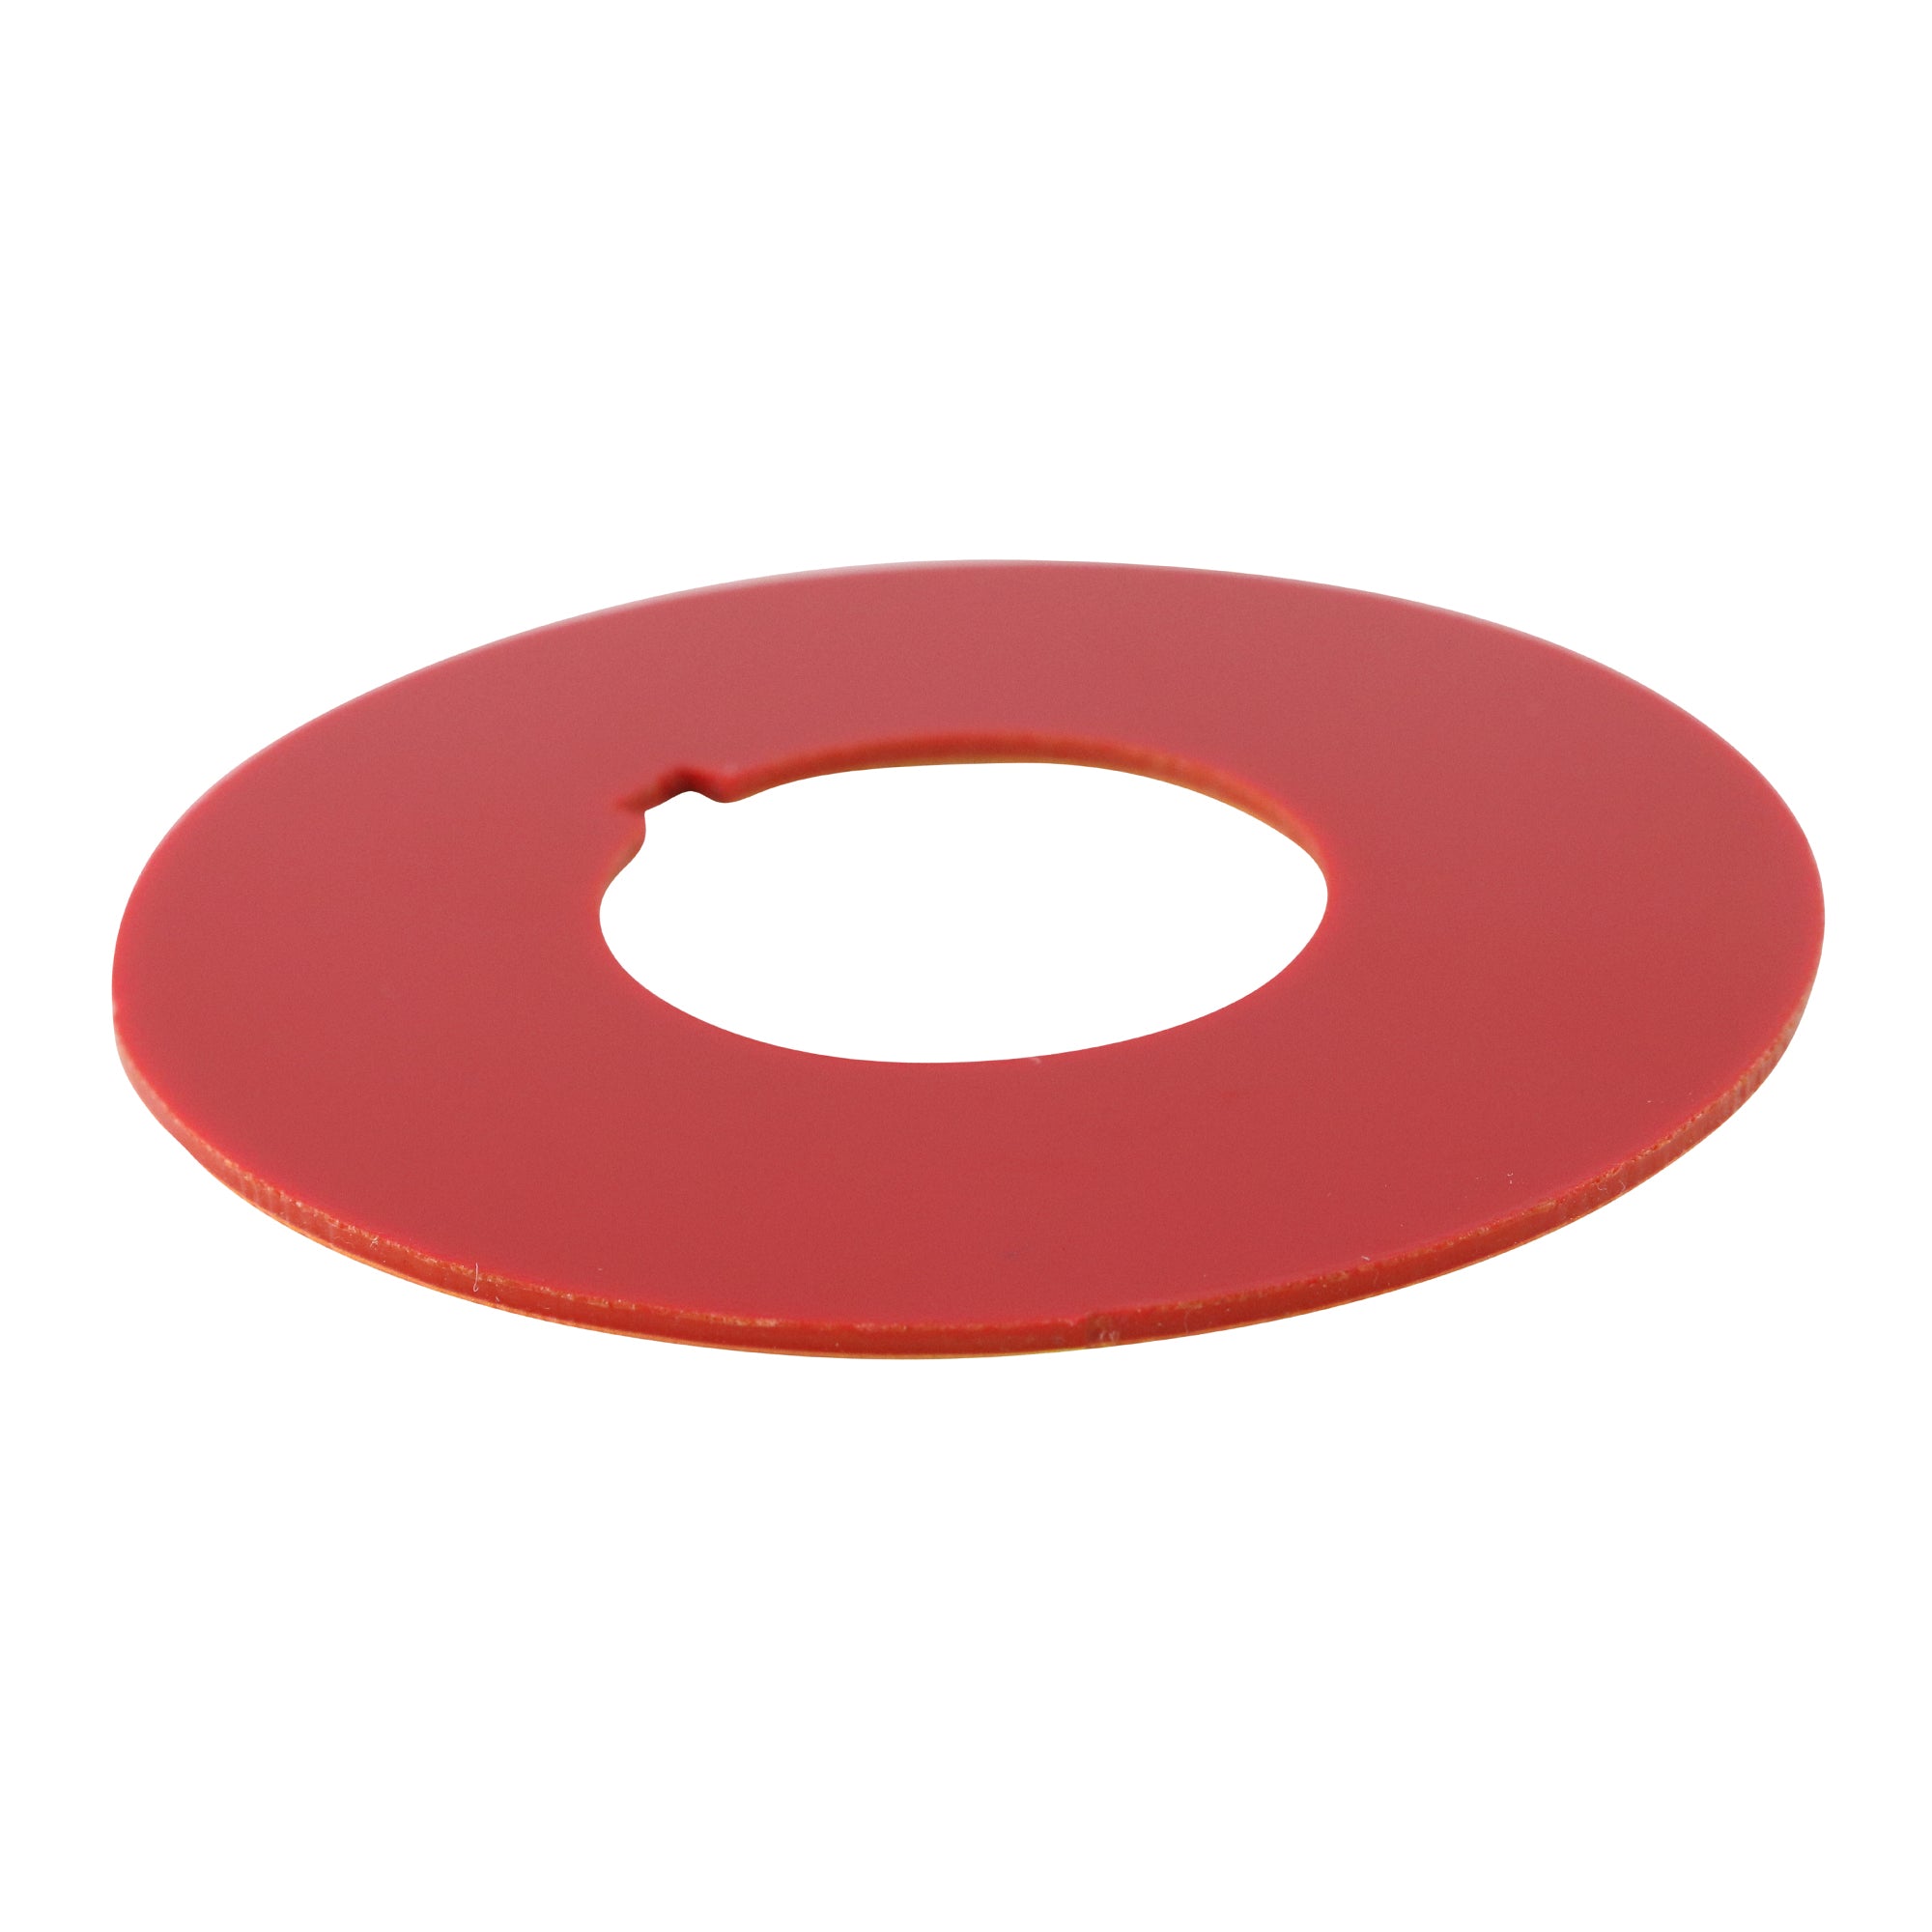 EATON, EATON 10250TRP76 PLASTIC ROUND LEGEND PLATE PUSH-BUTTONS, RED/YELLOW, 70MM